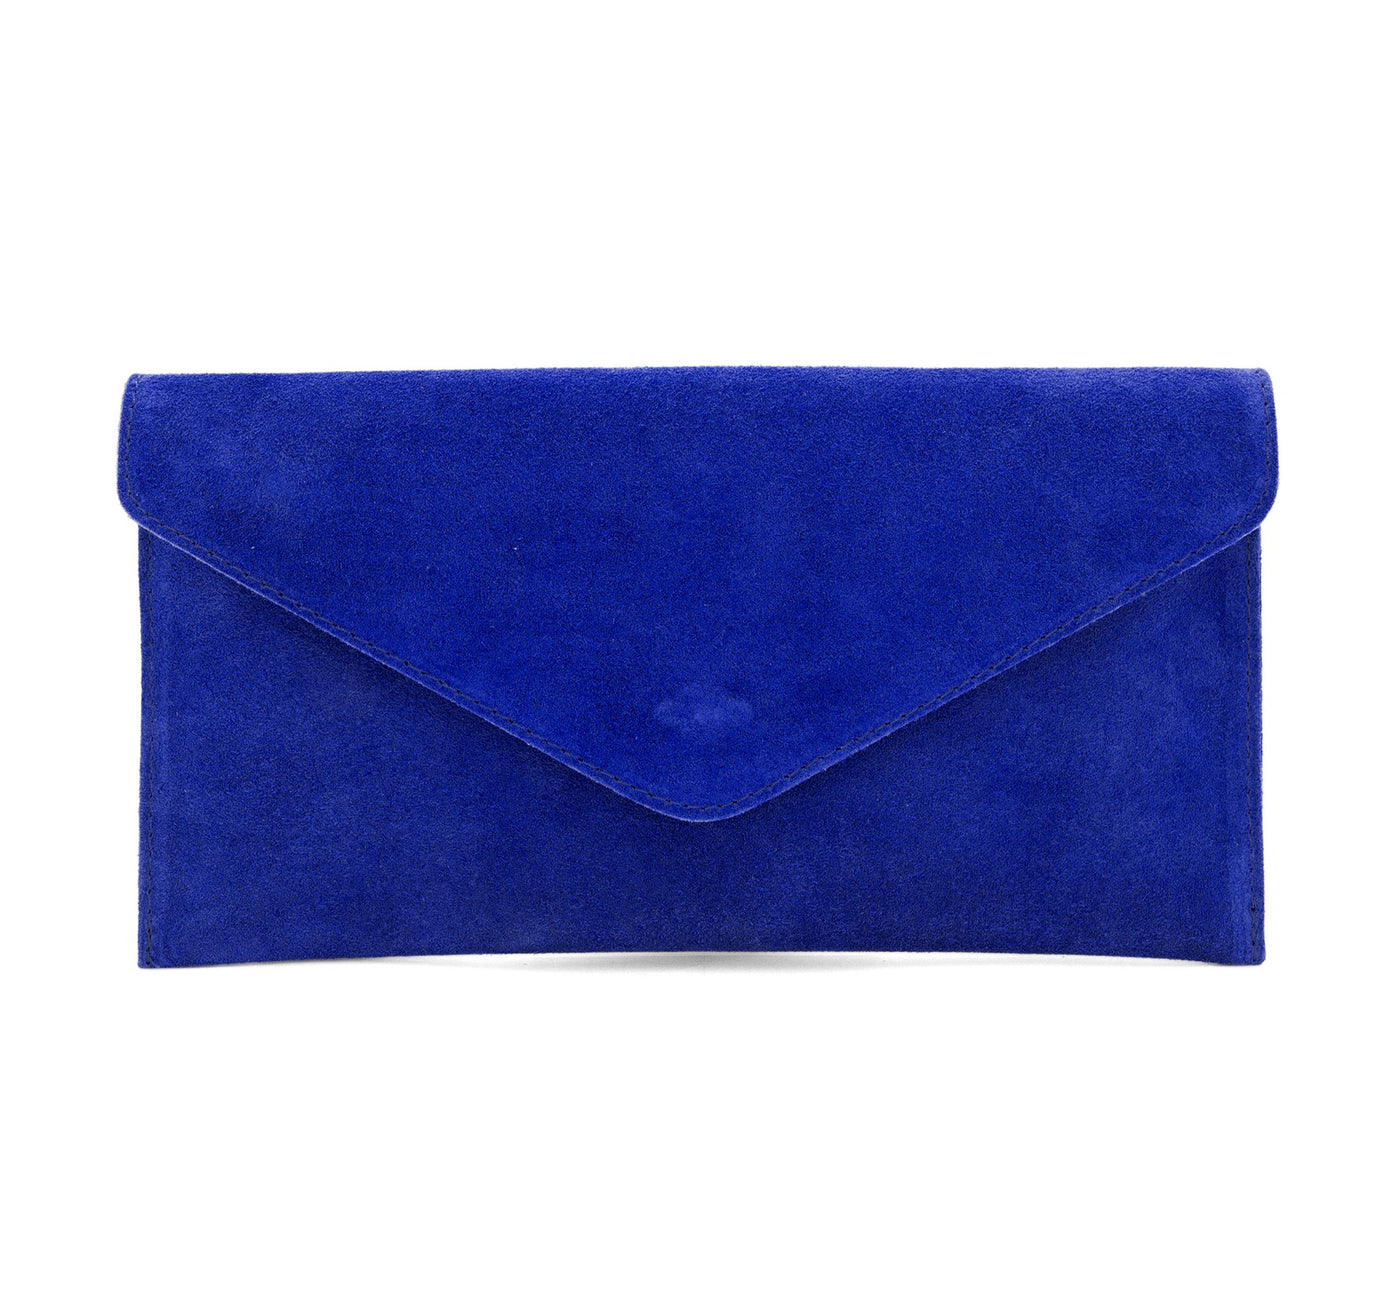 Electric Blue Suede Leather Clutch Bag